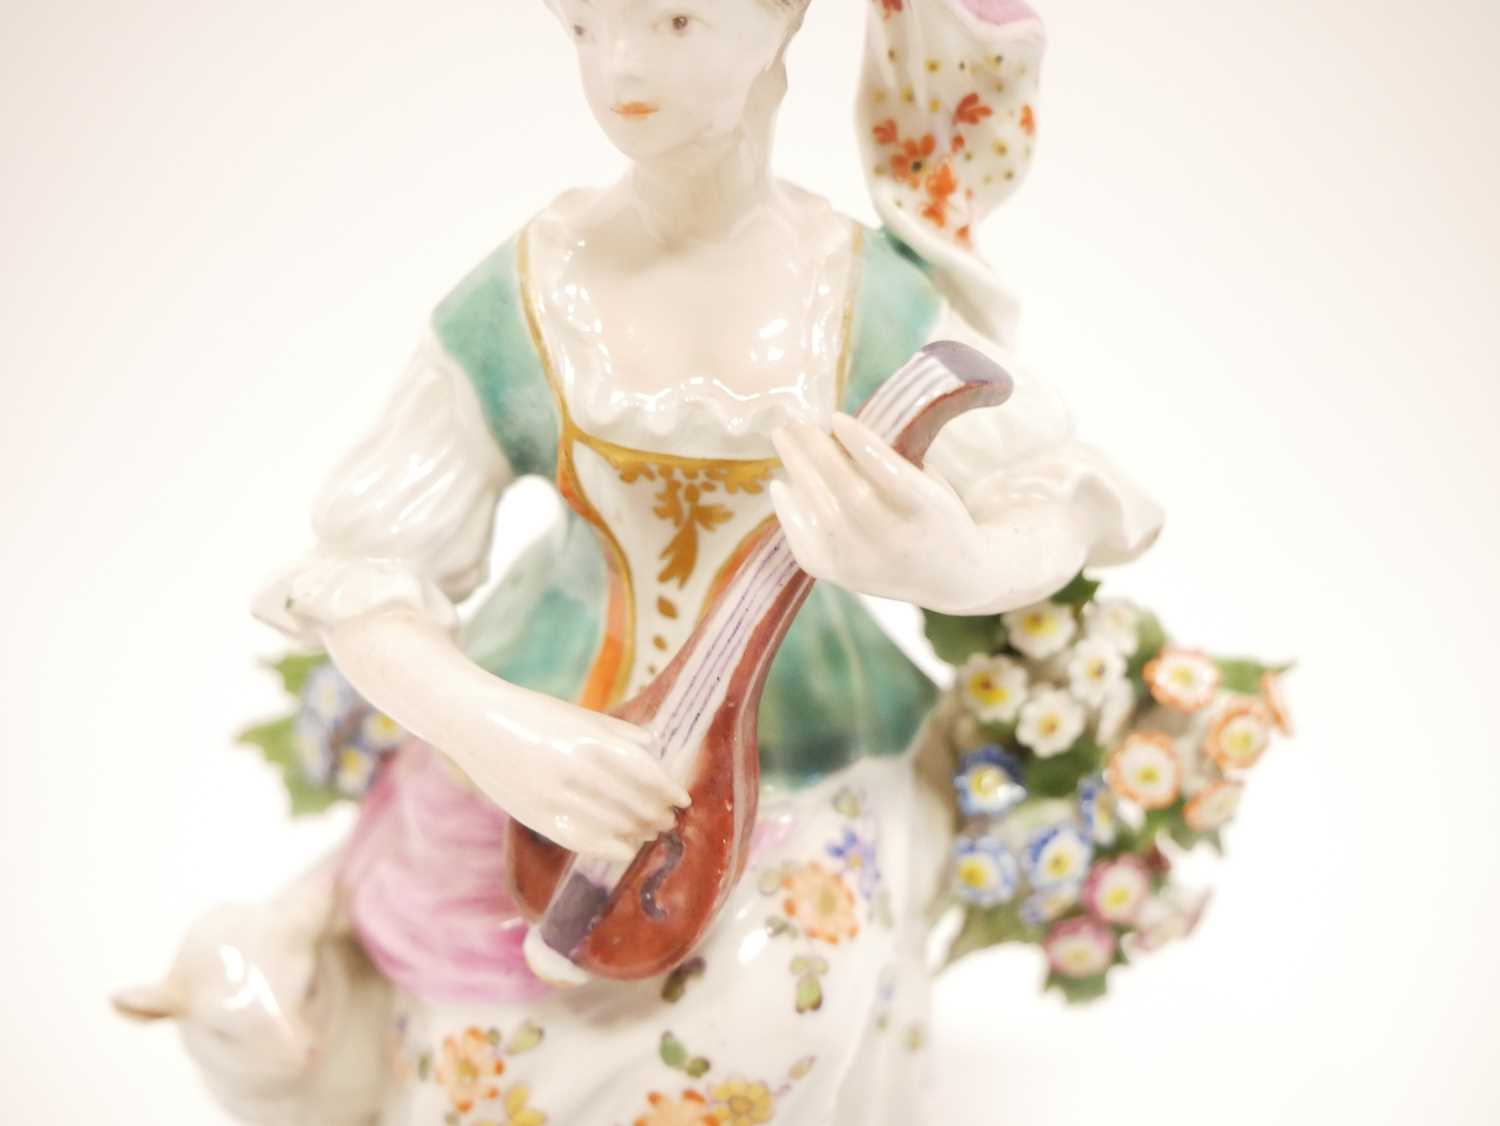 Derby Porcelain Figure of a Girl with Mandolin - Image 3 of 8